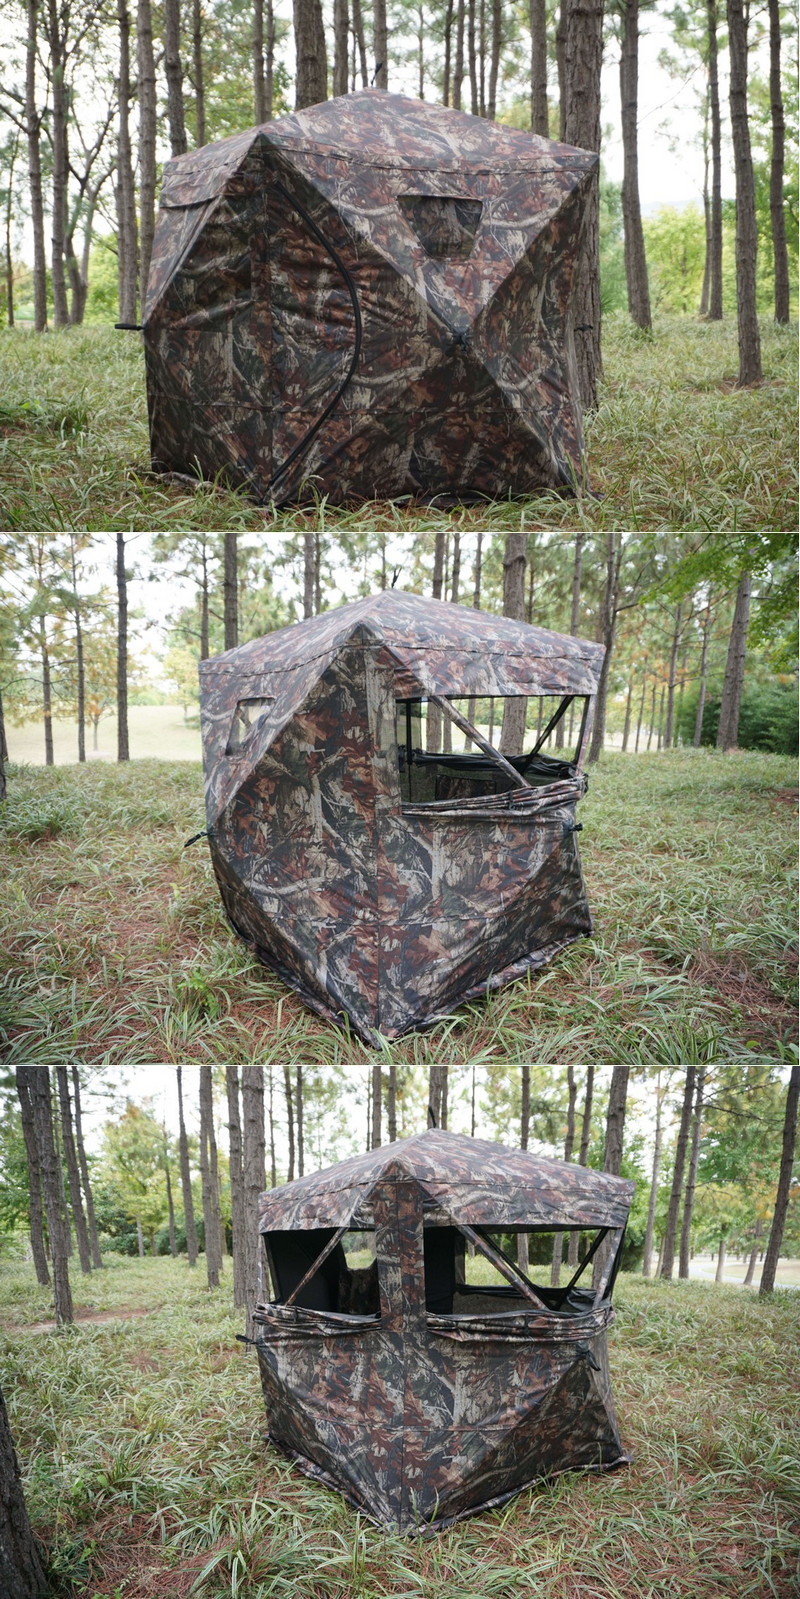 hunting tent Detail